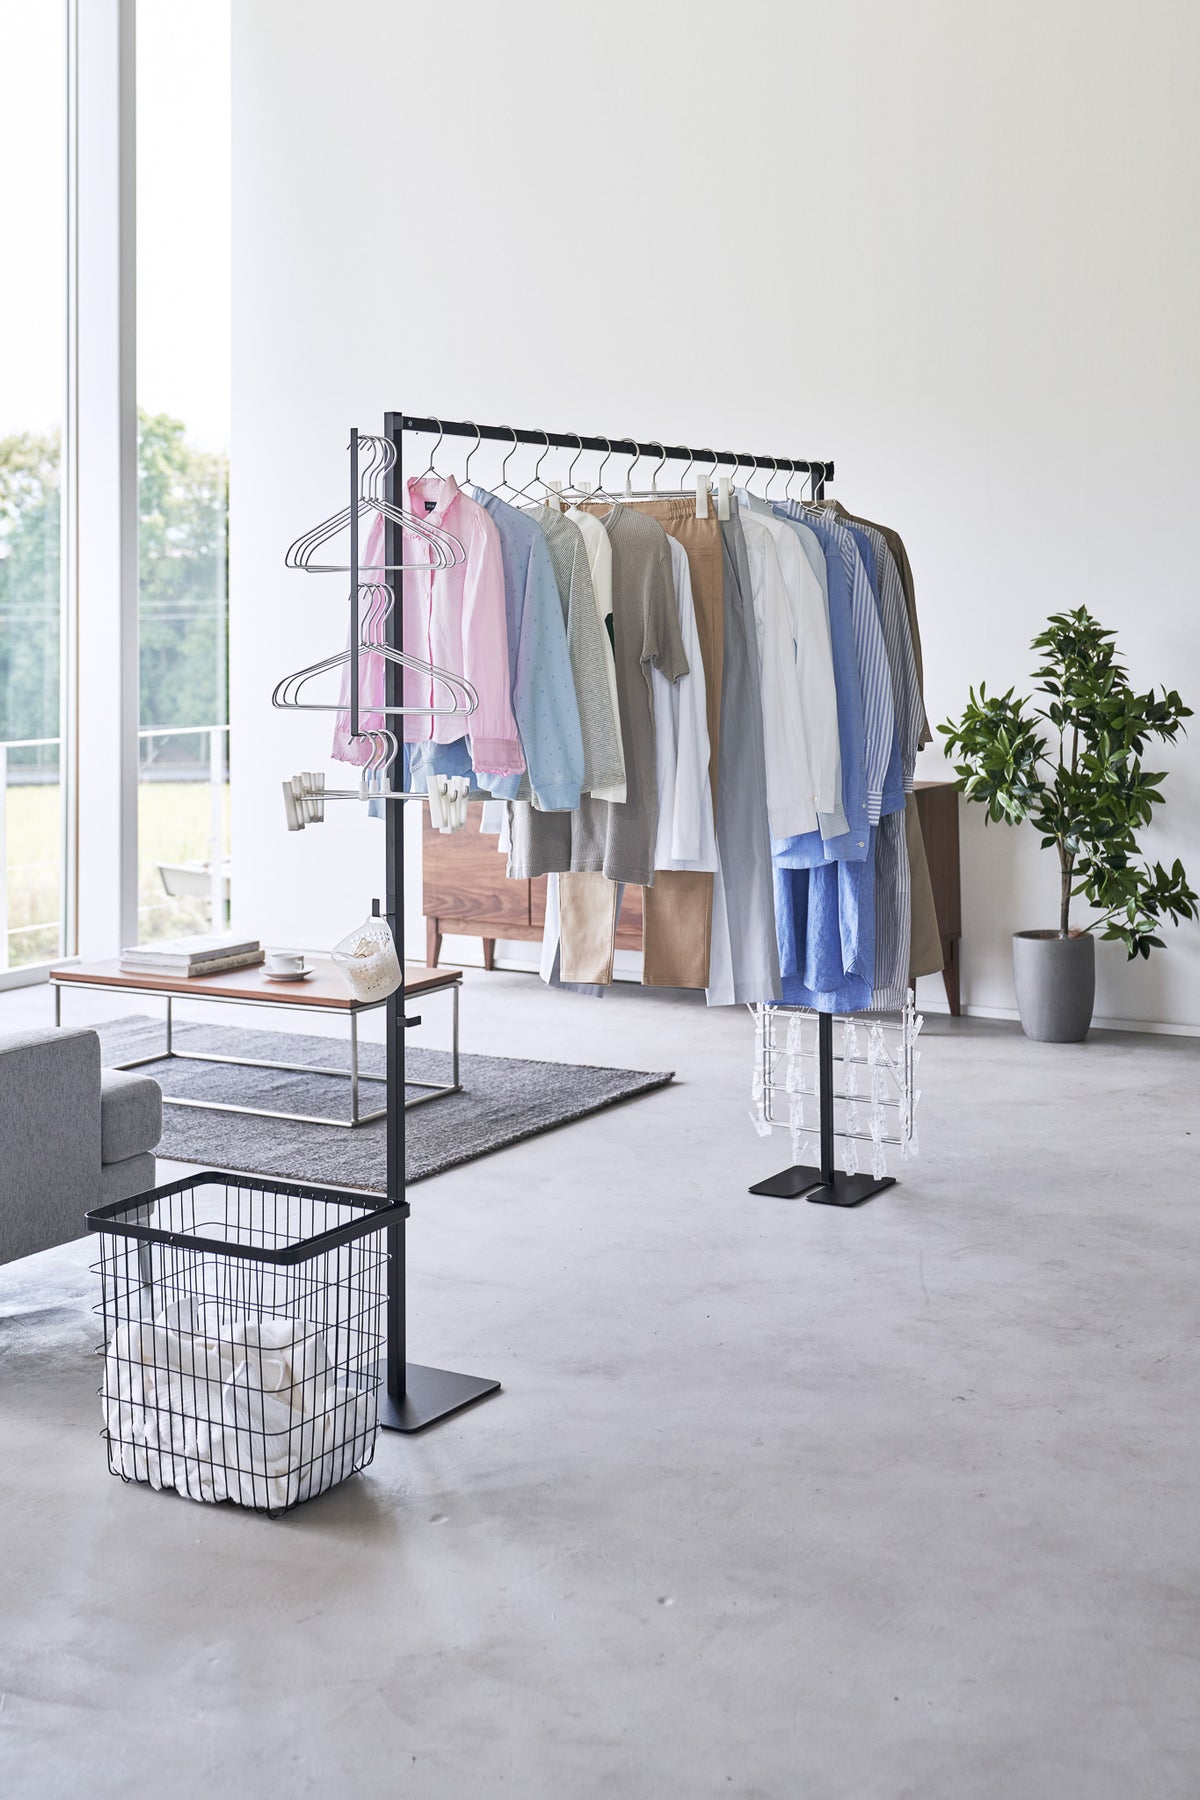 Foldable Drying Rack – Made in Japan